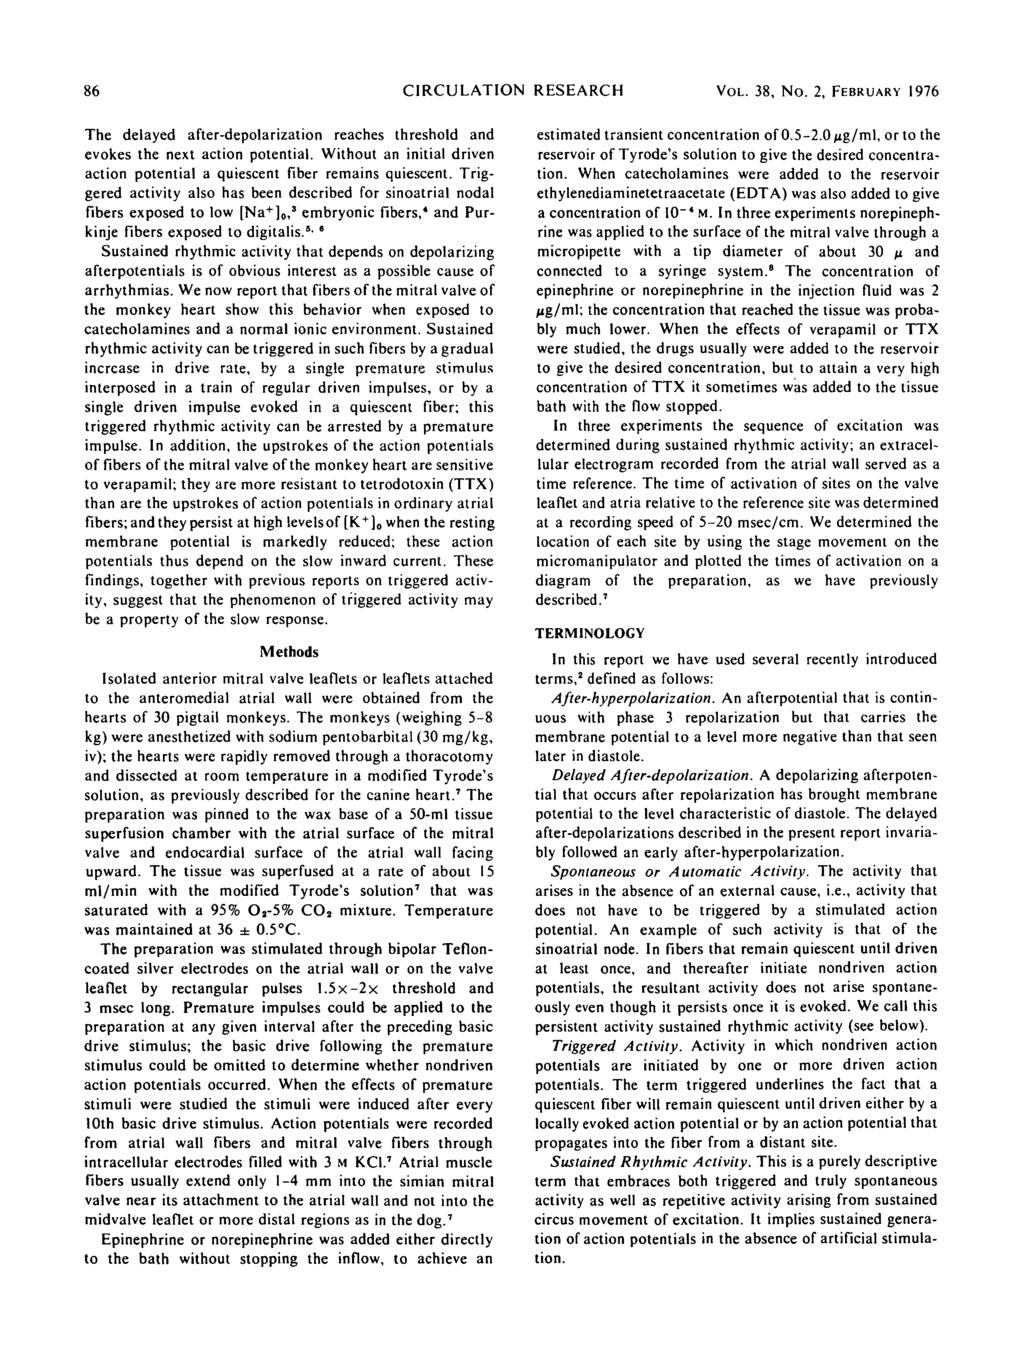 86 CIRCULATION RESEARCH VOL. 38, N. 2, FEBRUARY 1976 The delayed after-deplarizatin reaches threshld and evkes the next actin ptential.